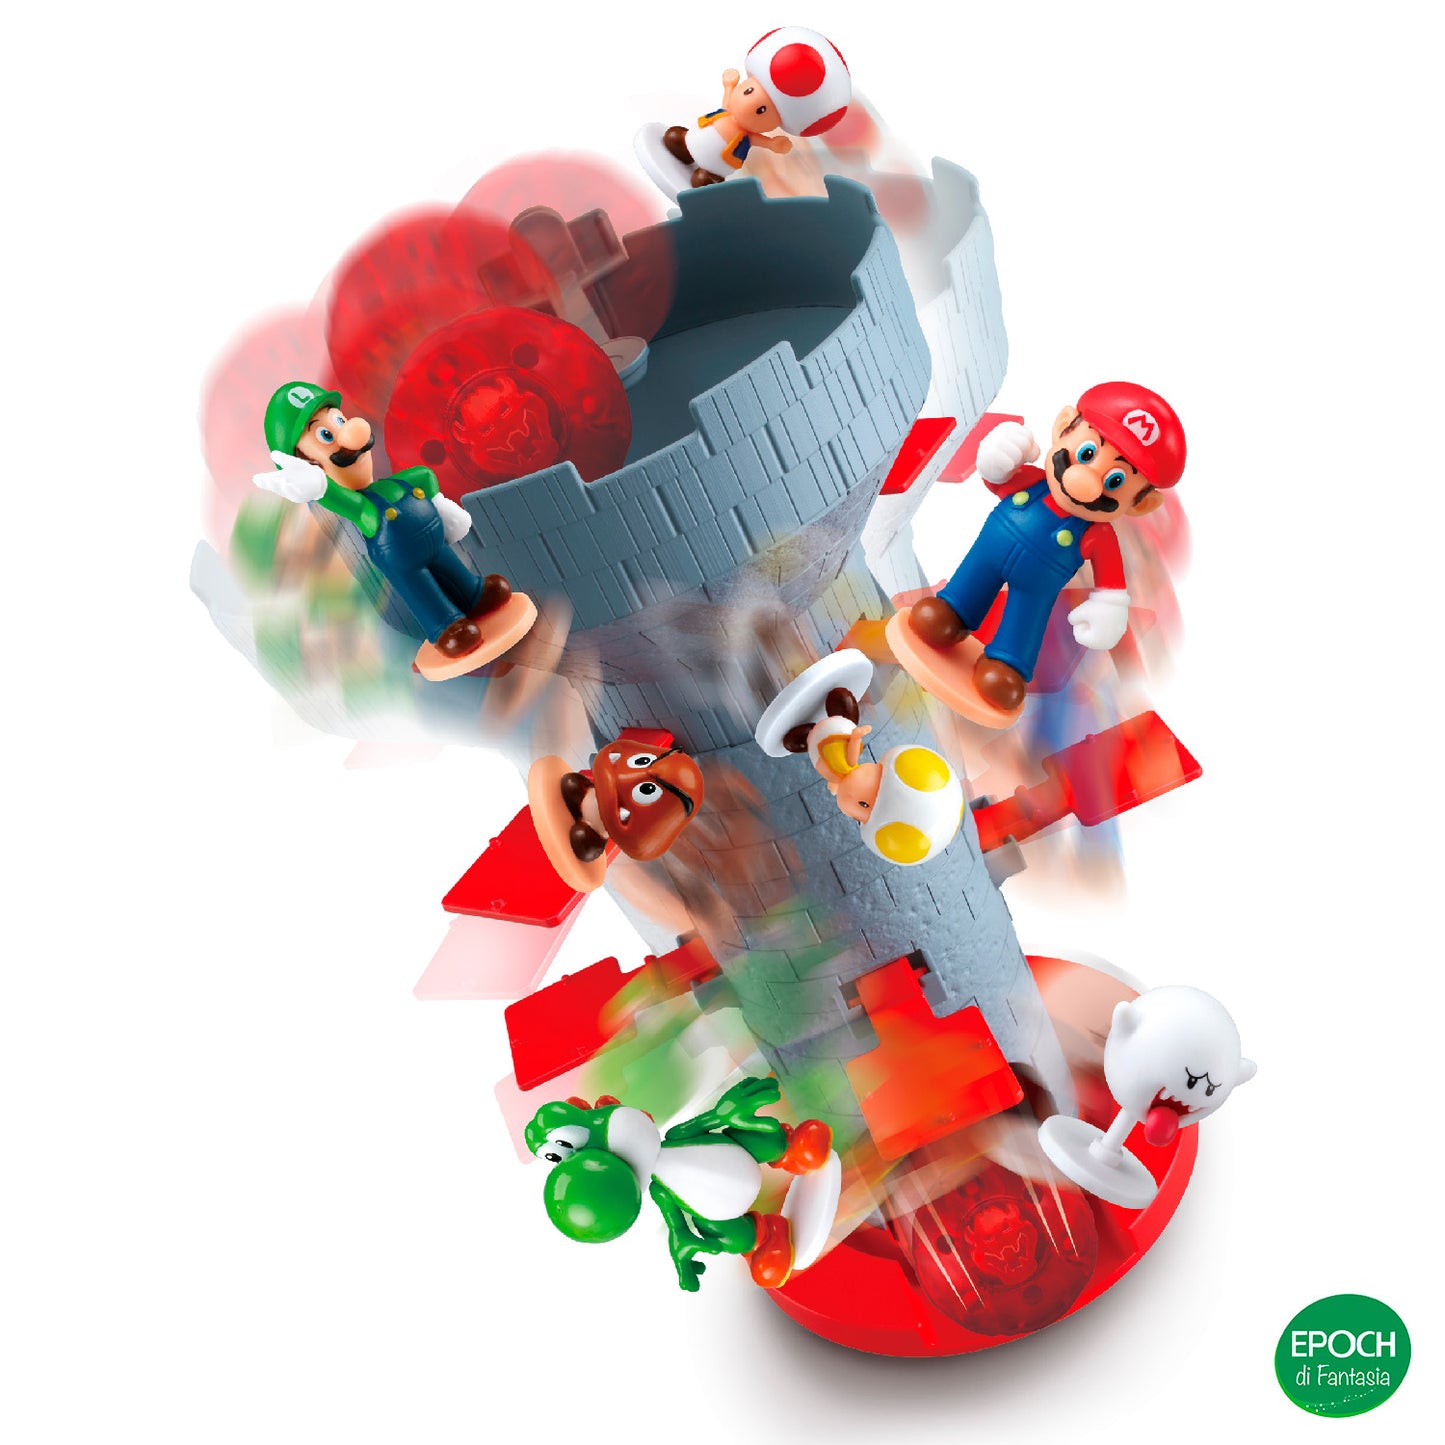 Epoch - Super Mario Blow up! Shaky Tower